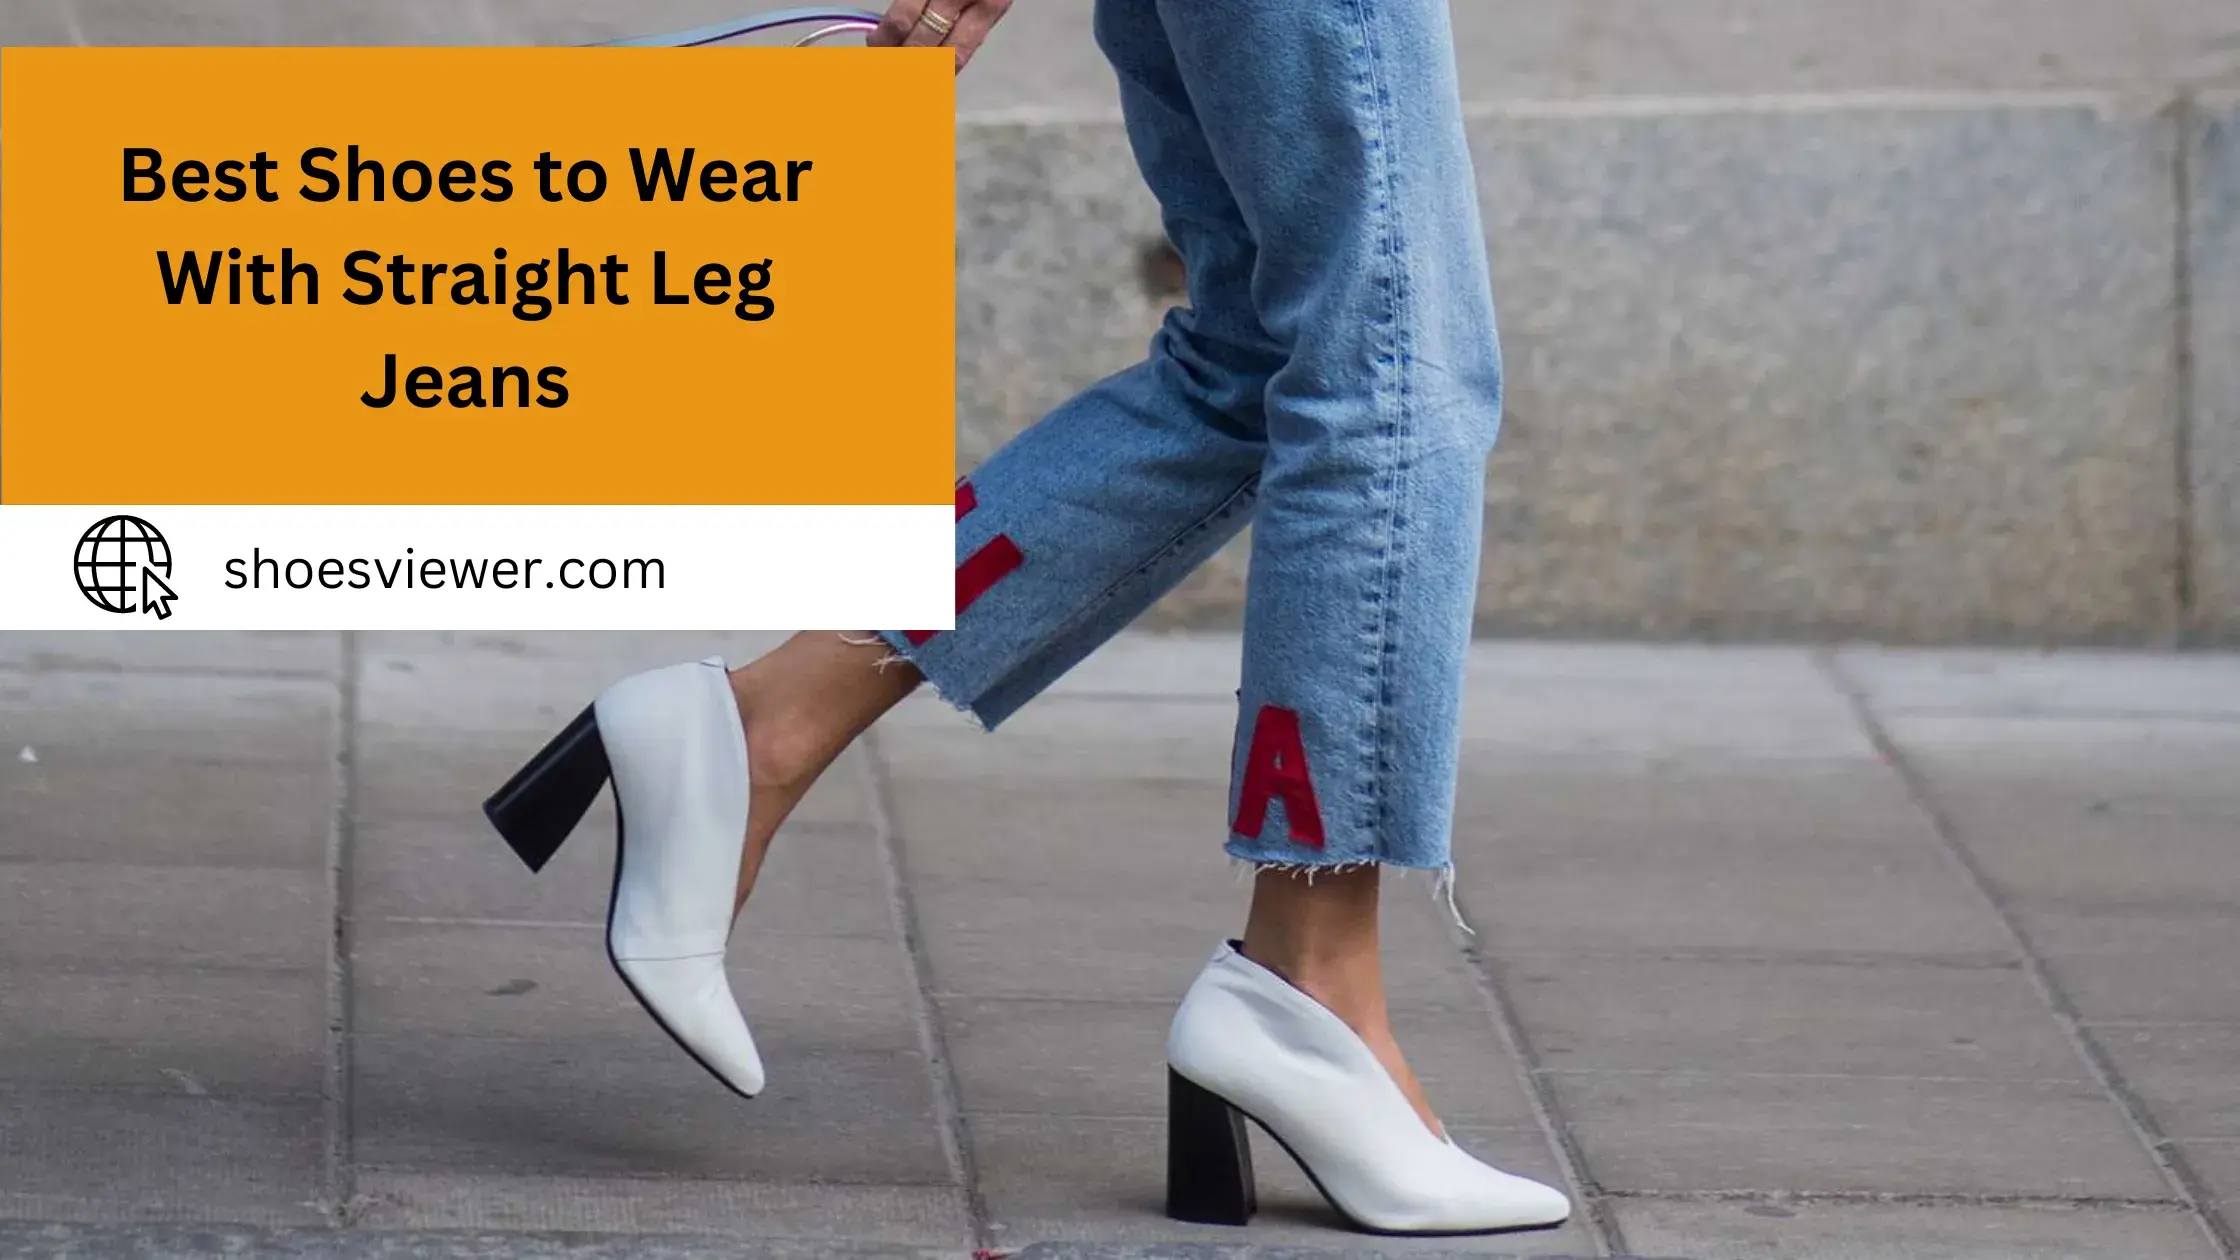 Best Shoes to Wear With Straight Leg Jeans - Complete Guide